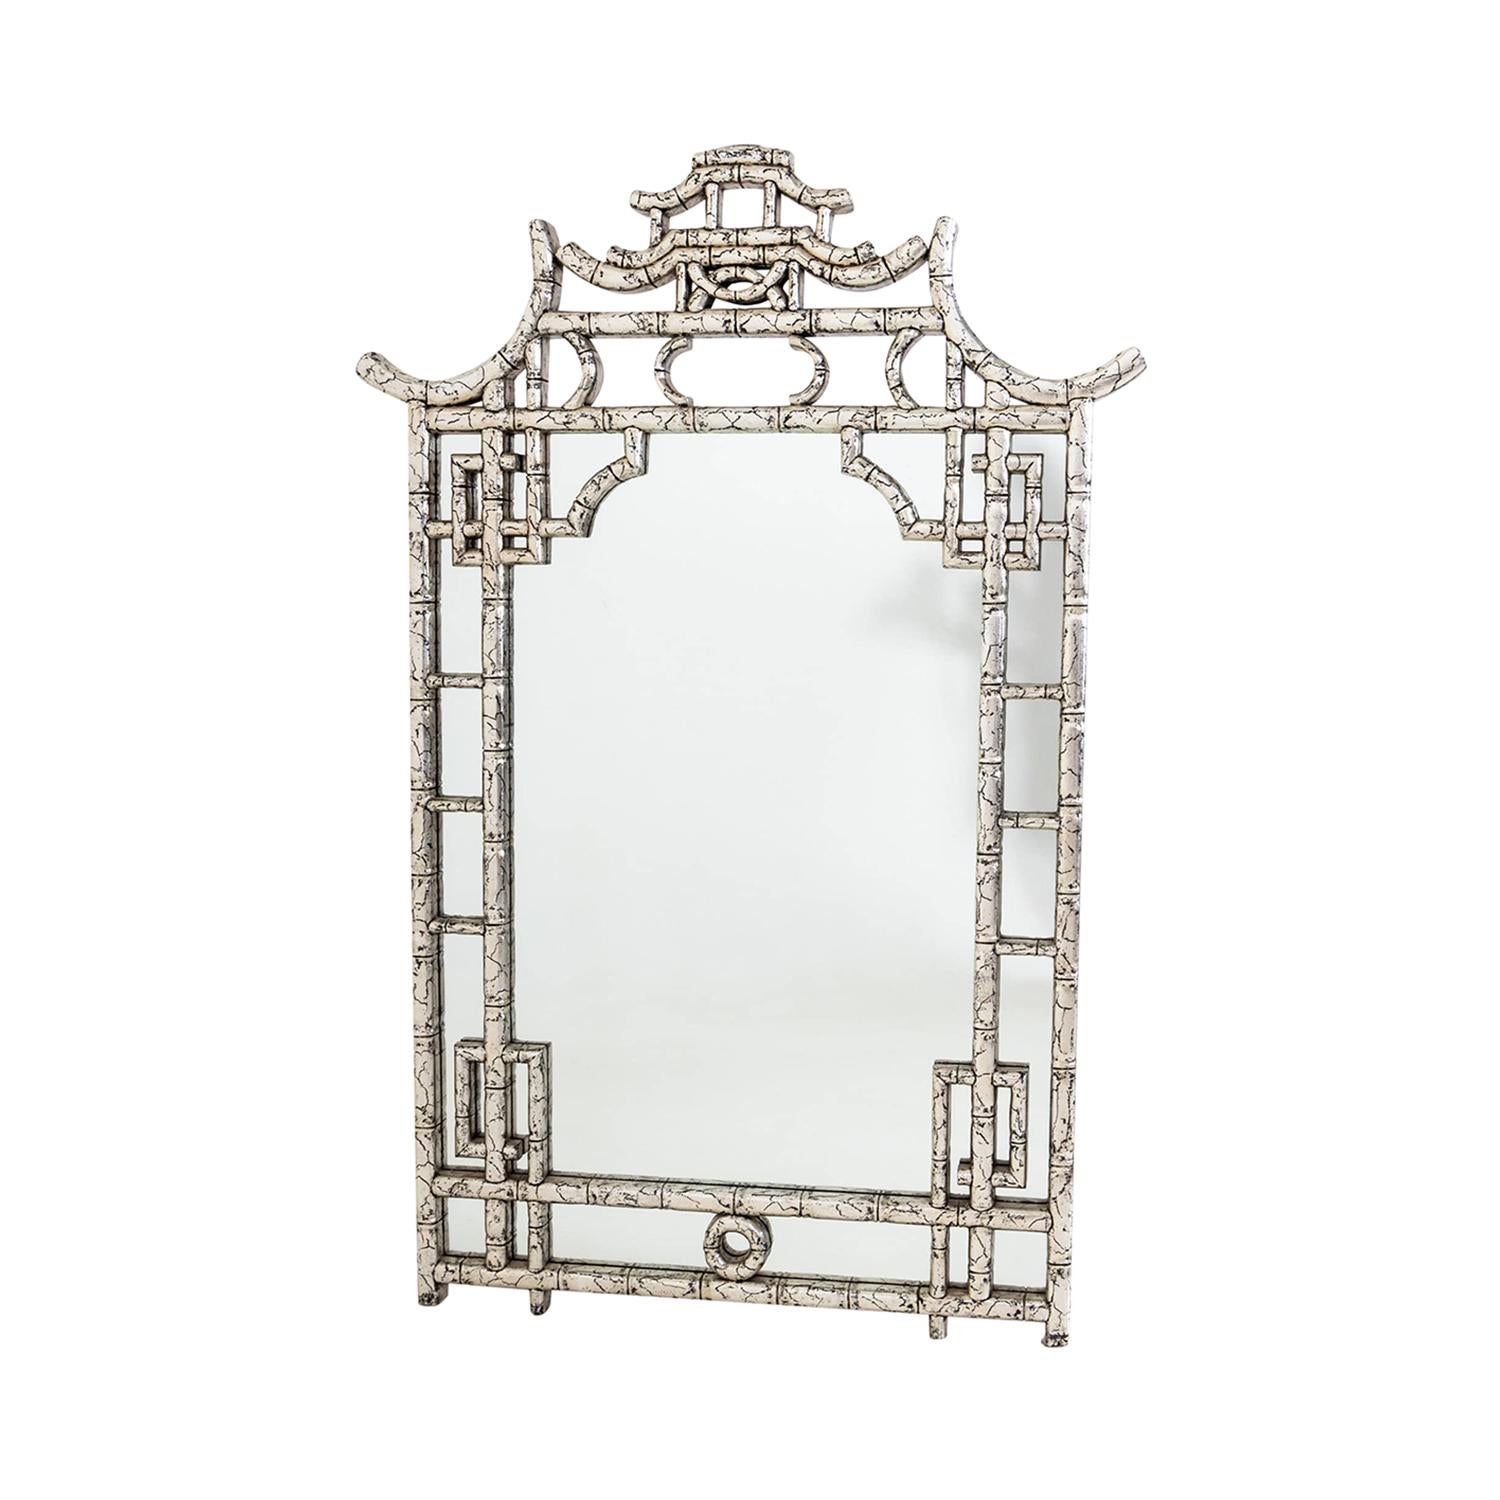 A light-grey, white vintage Mid-Century modern Italian rectangular wall mirror made of hand crafted painted faux bamboo with its original mirror glass, in good condition. The detailed wall décor piece is enhanced by wood art. Wear consistent with